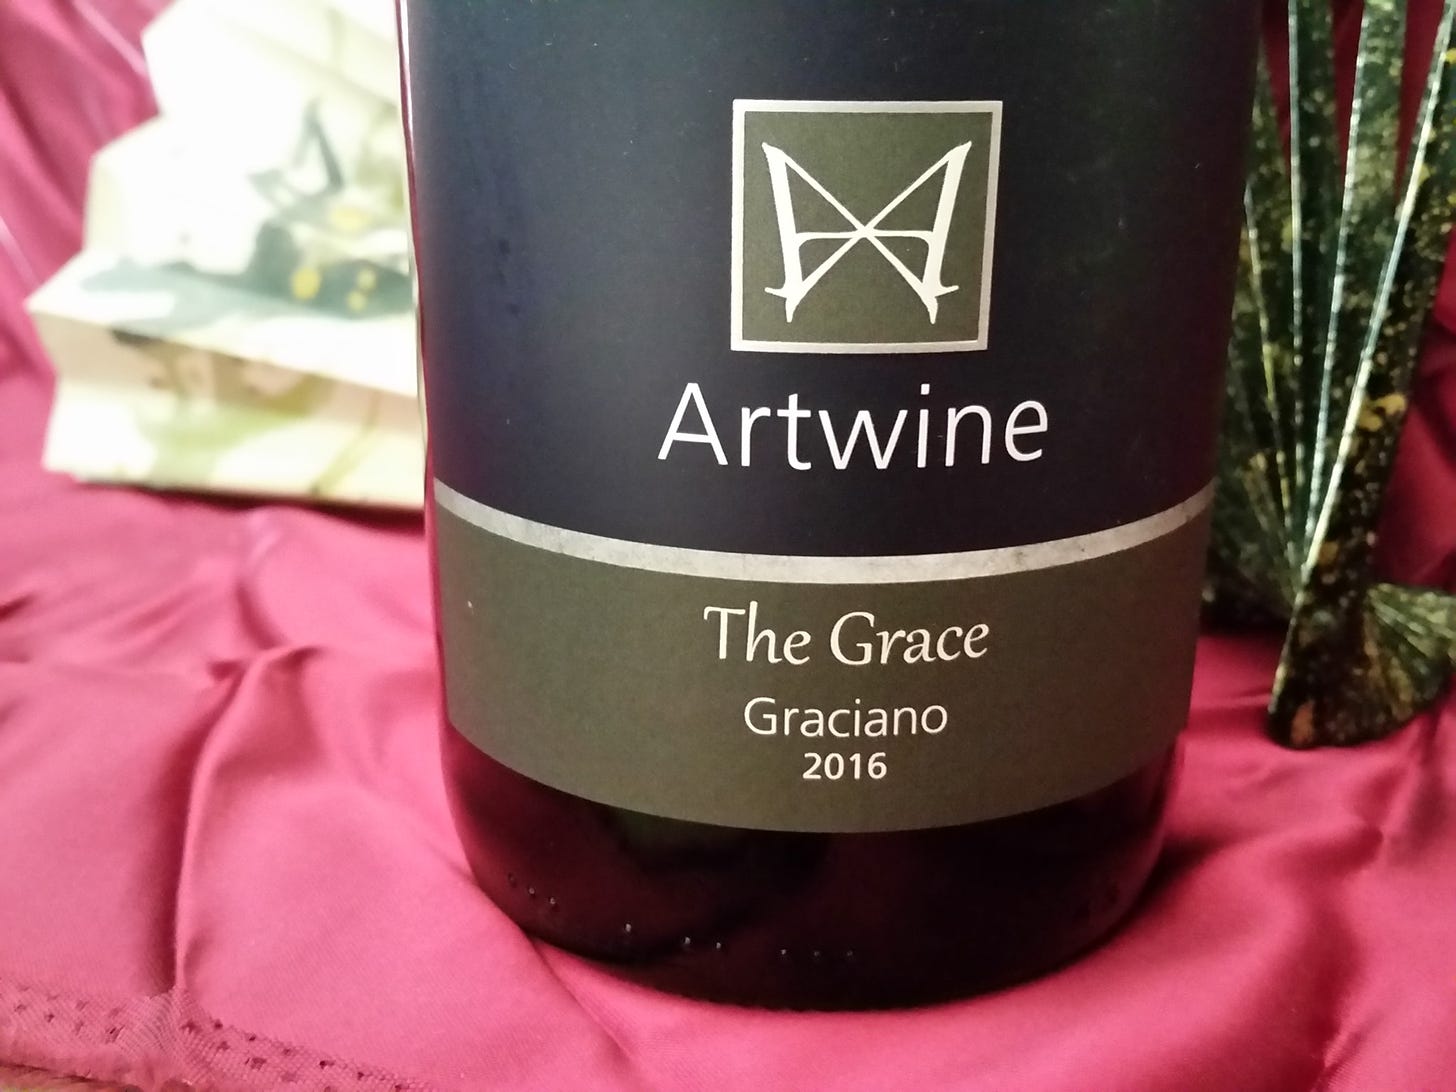 Artwine Graciano from the Clare Valley in South Australia.